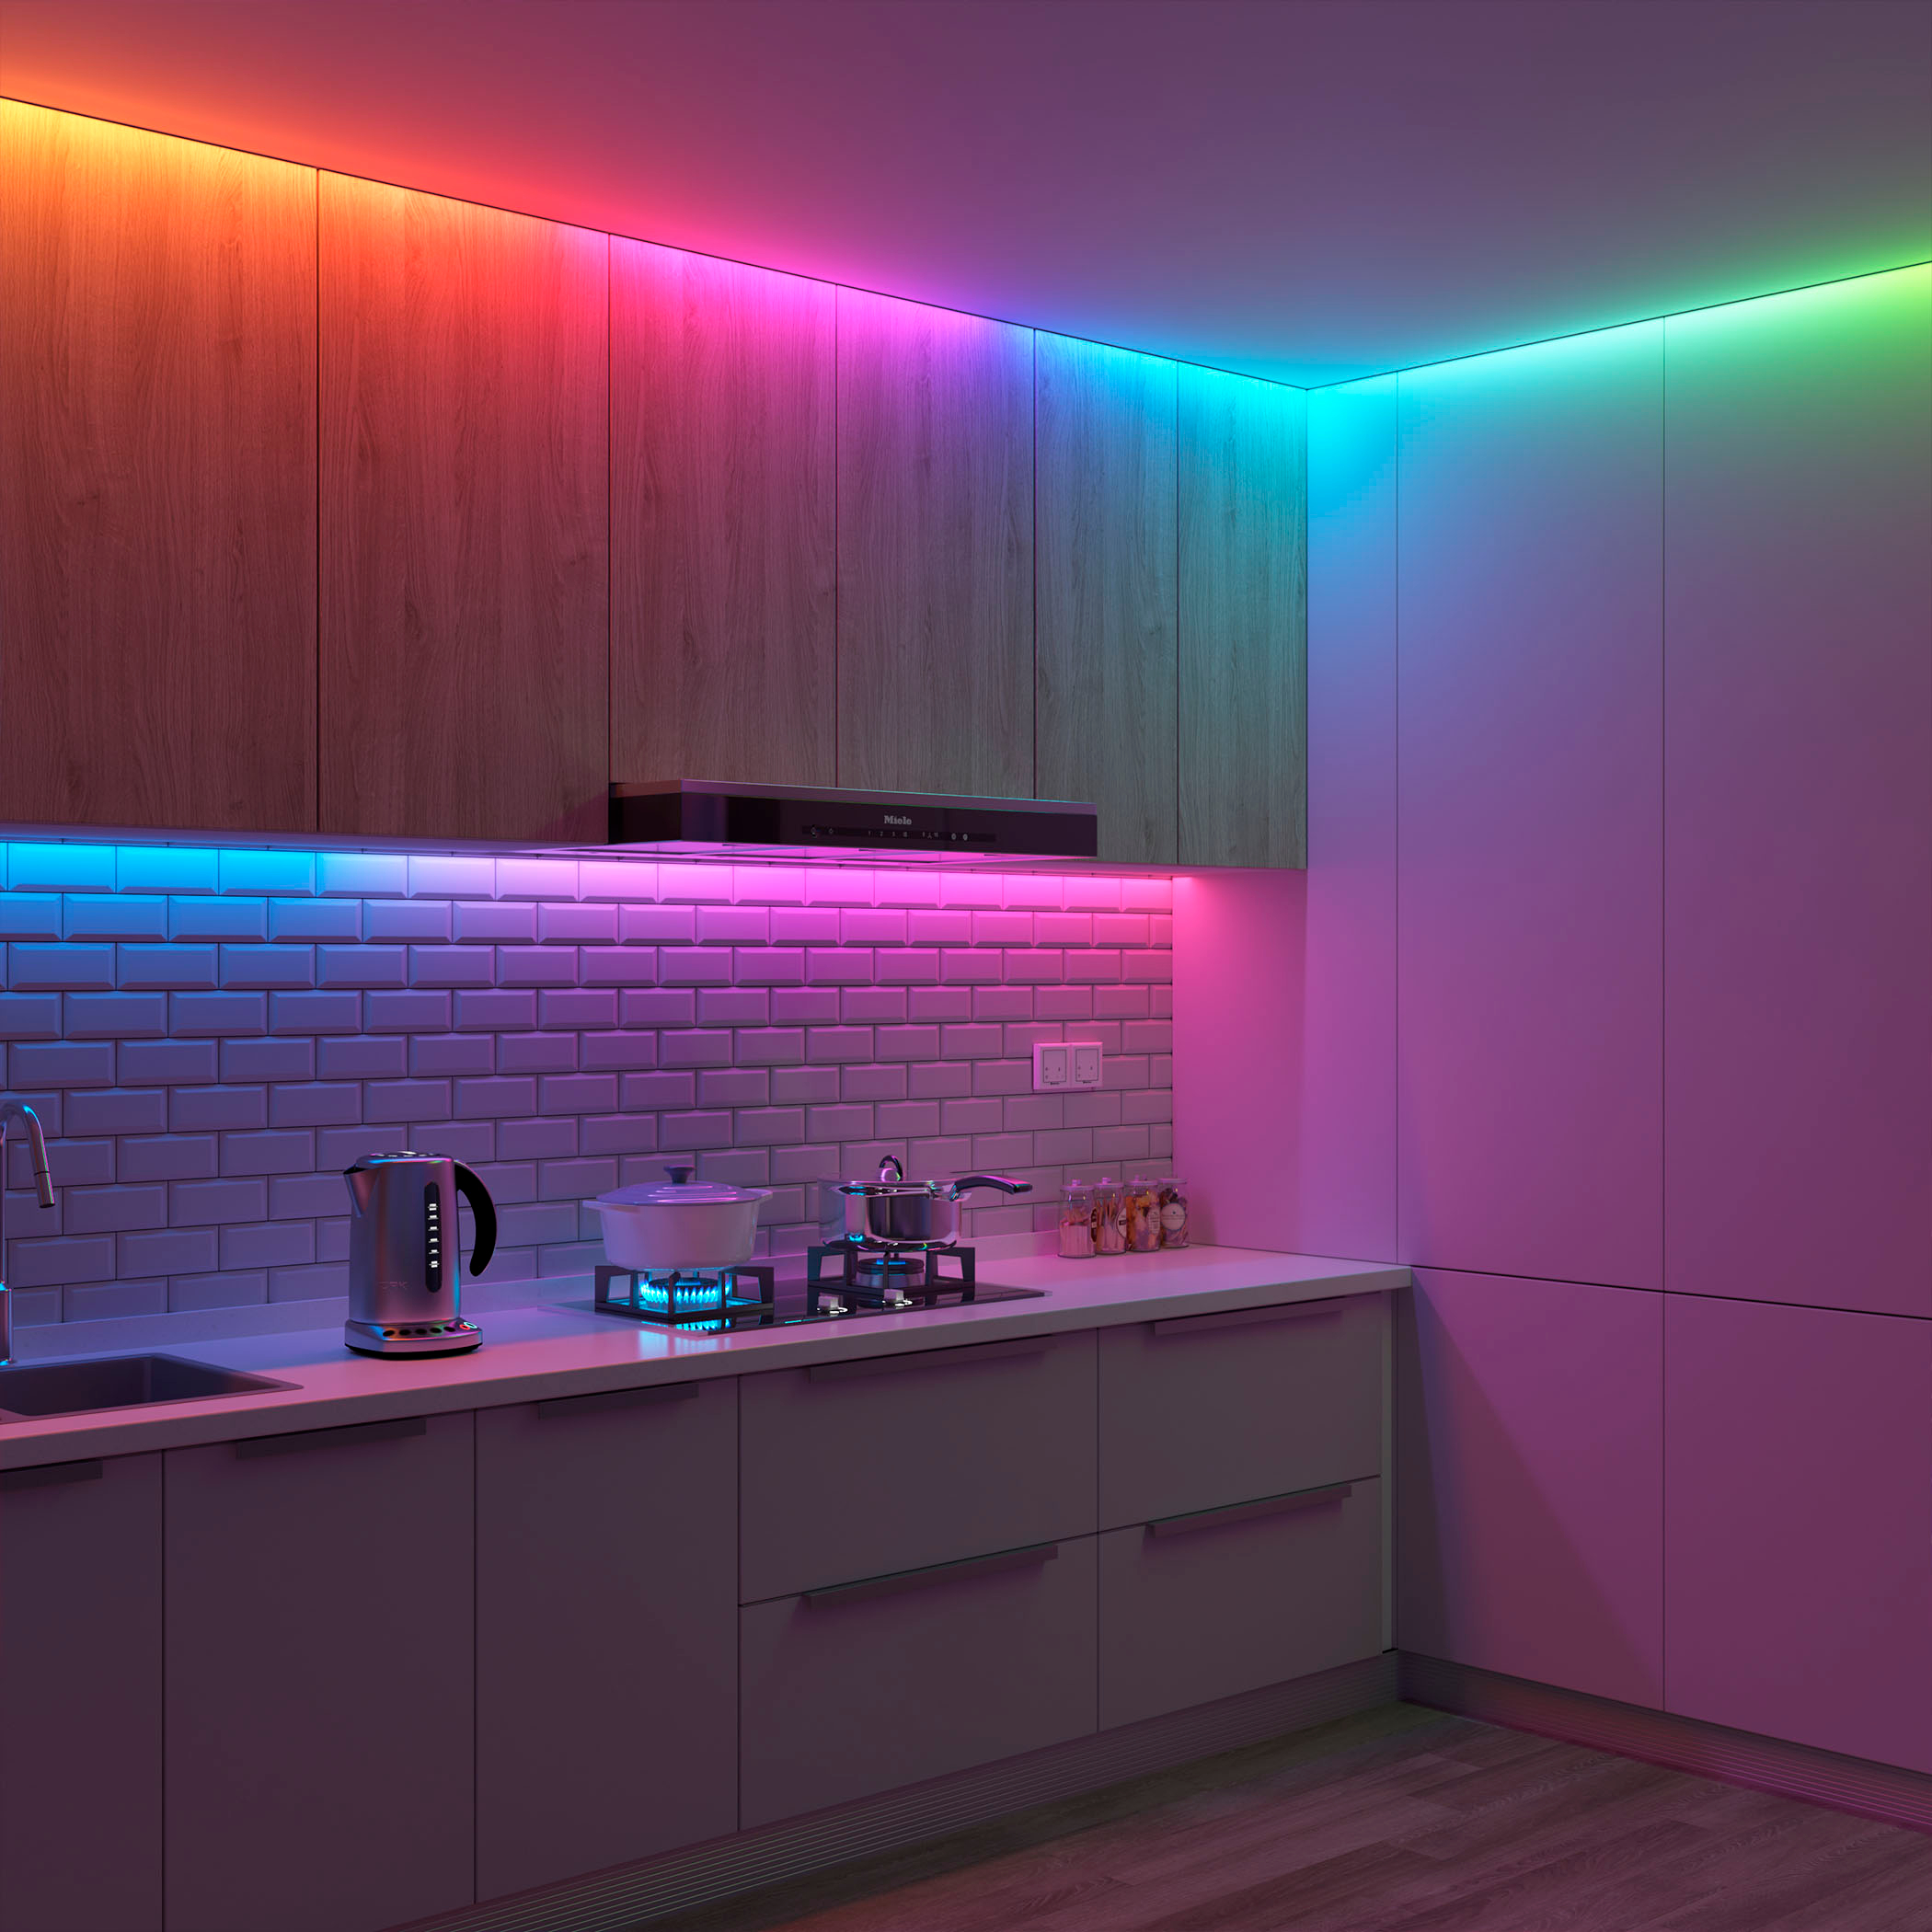 Govee's first Matter product is a 6.5-foot color light strip